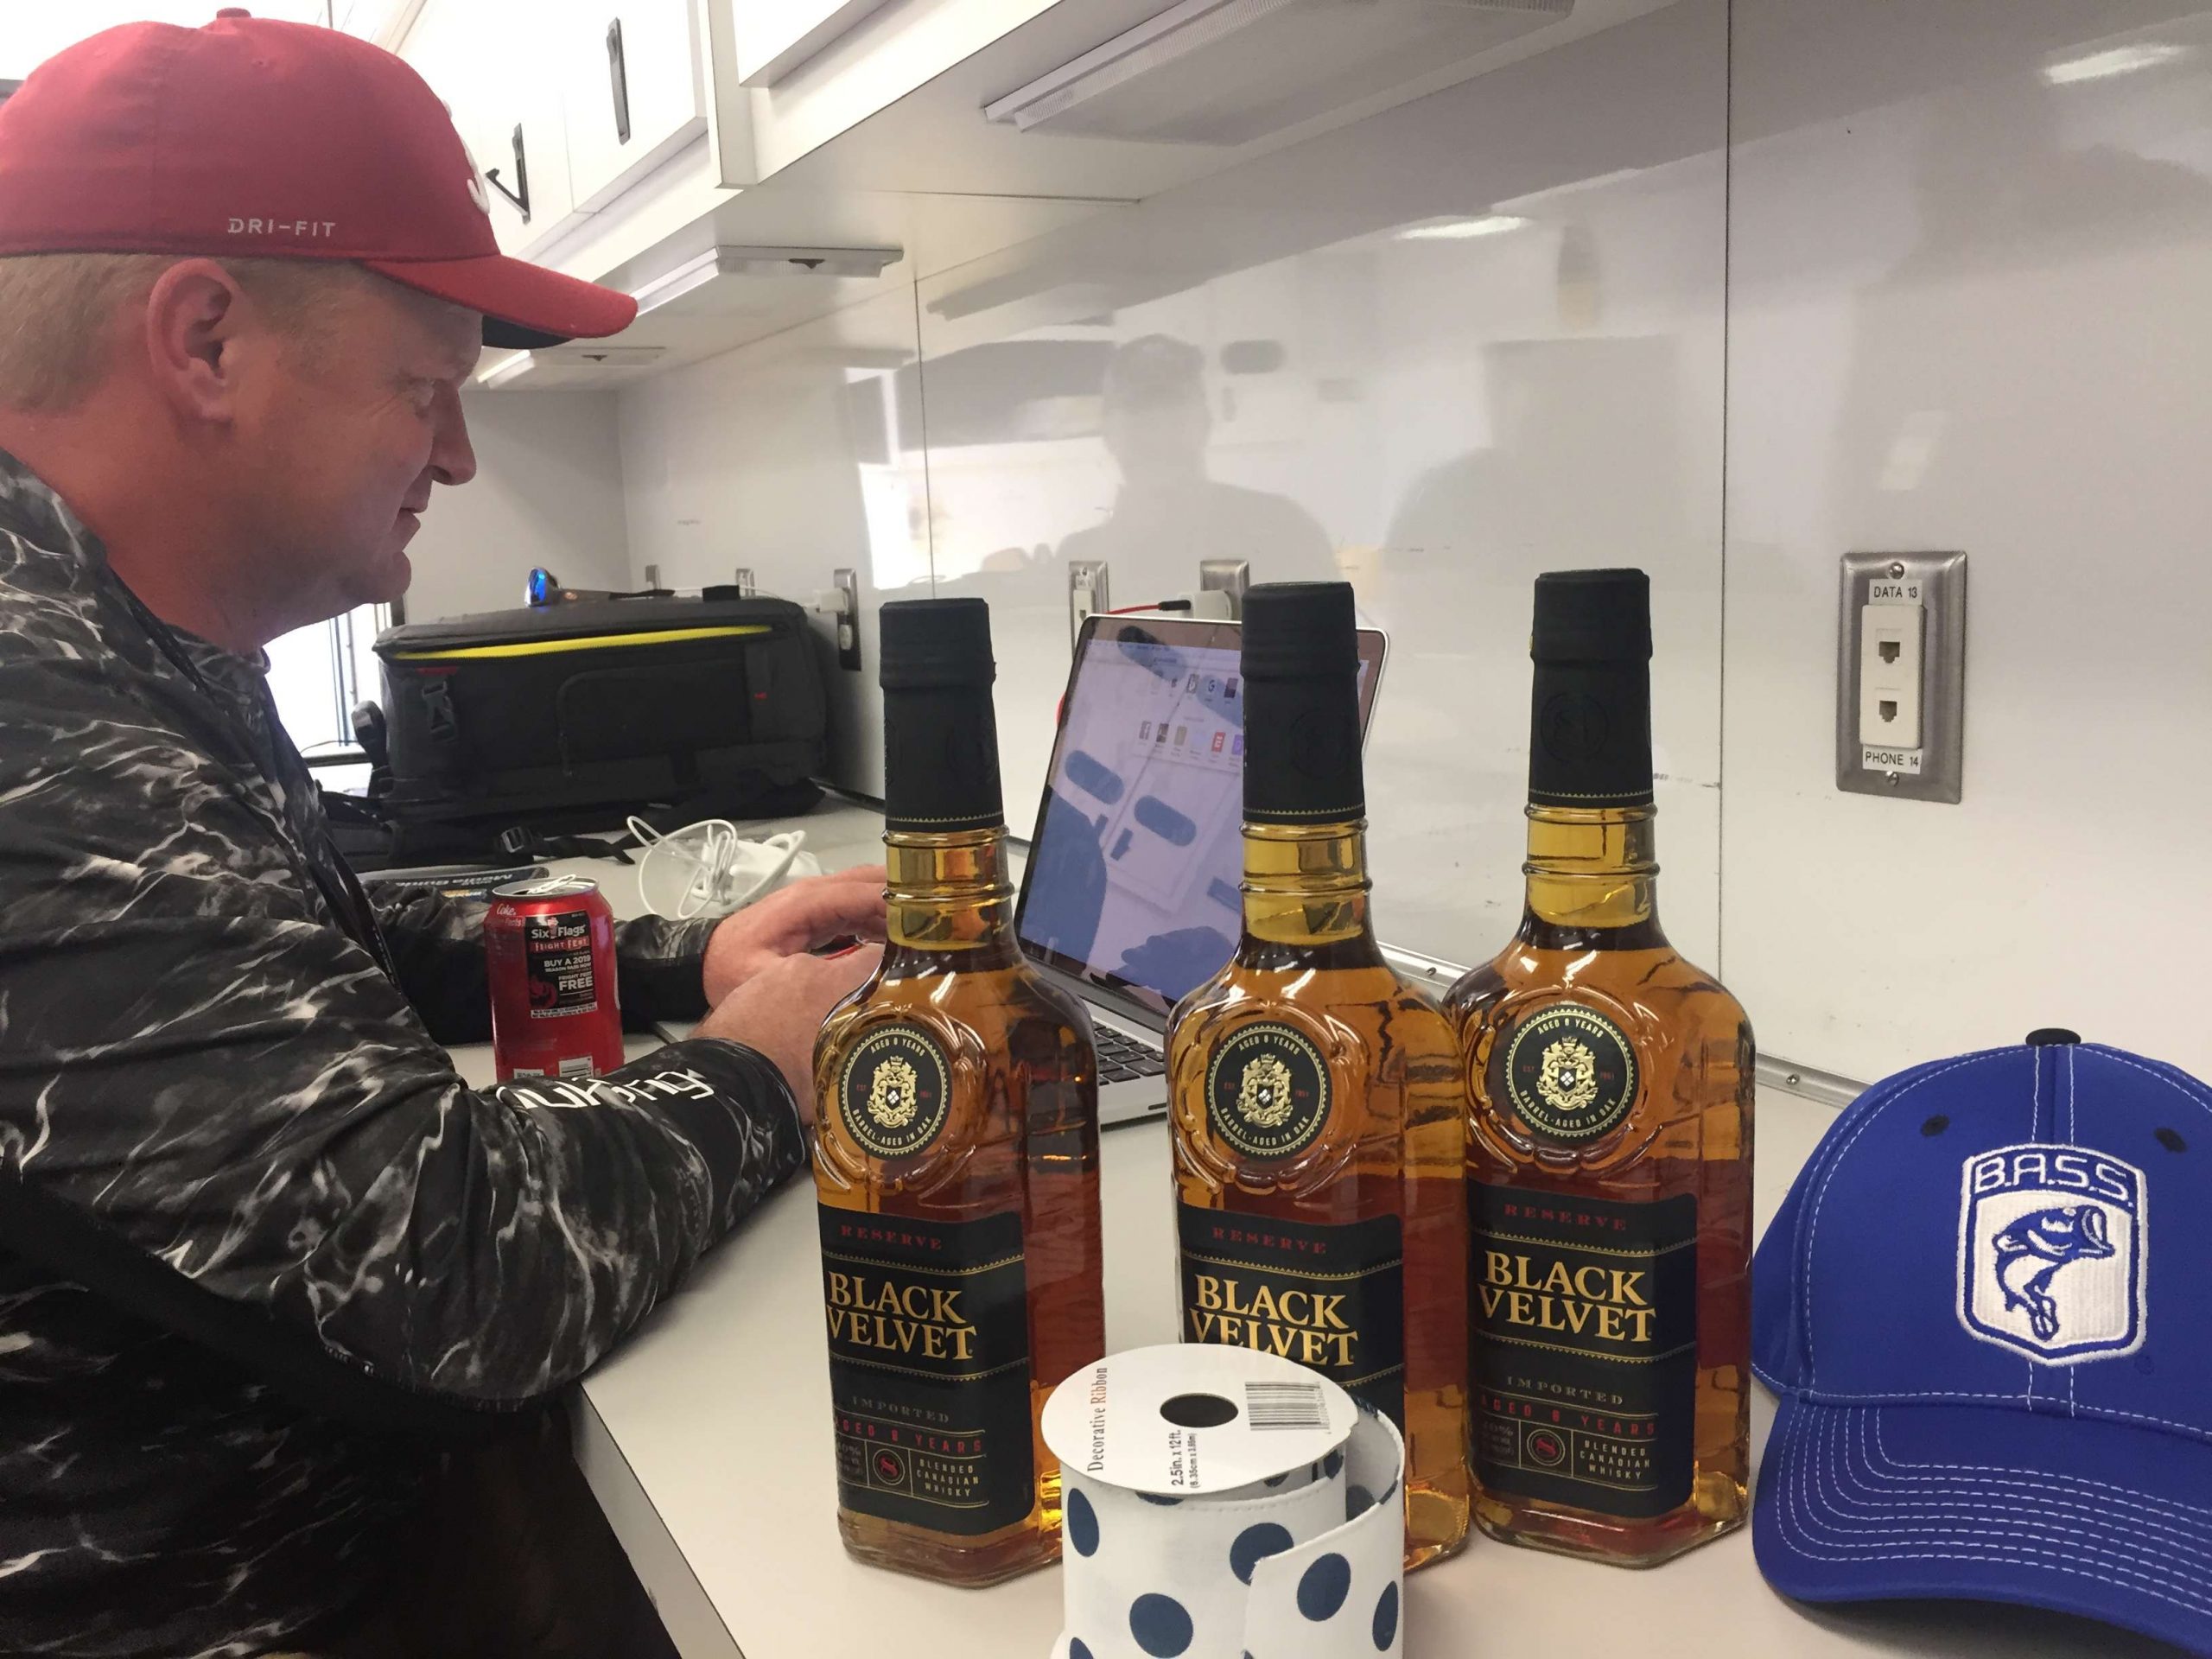 <em>B.A.S.S. Times</em> editor Bryan Brasher had no problem sharing his workspace with the prize bottles. 